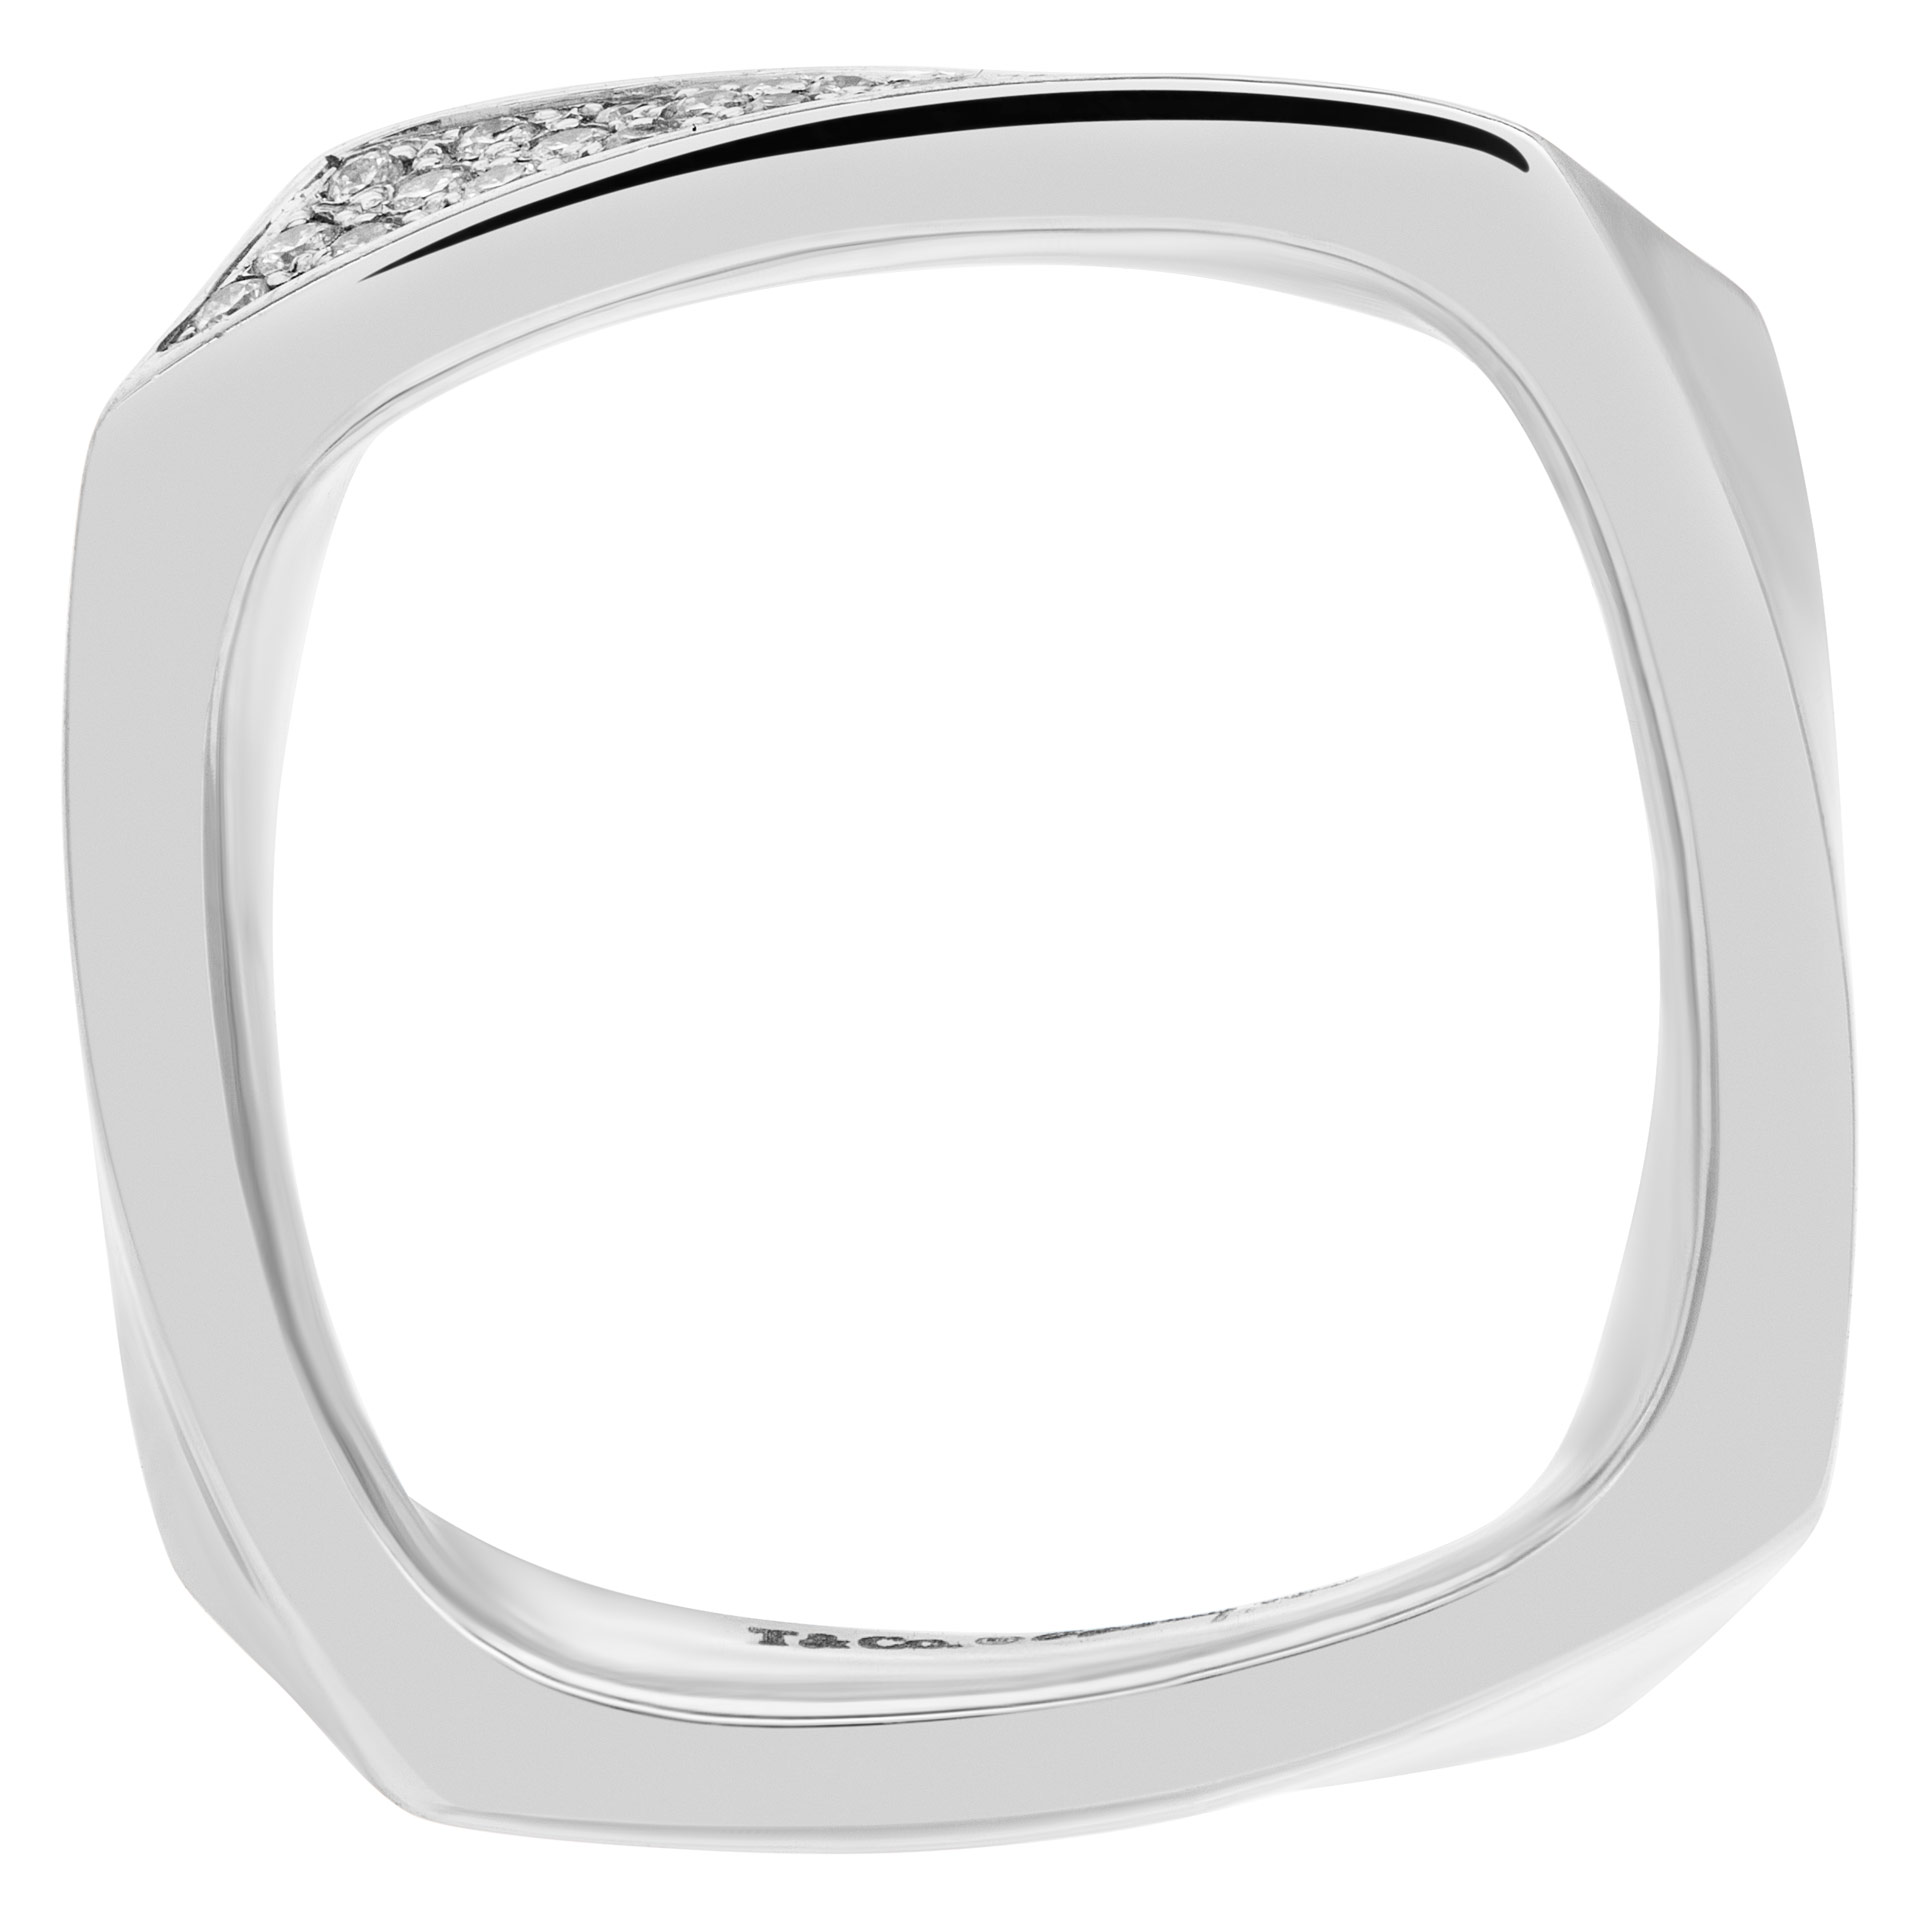 Tiffany & Co. Torque Frank Gehry 18k White Gold Diamond Square Ring 0.